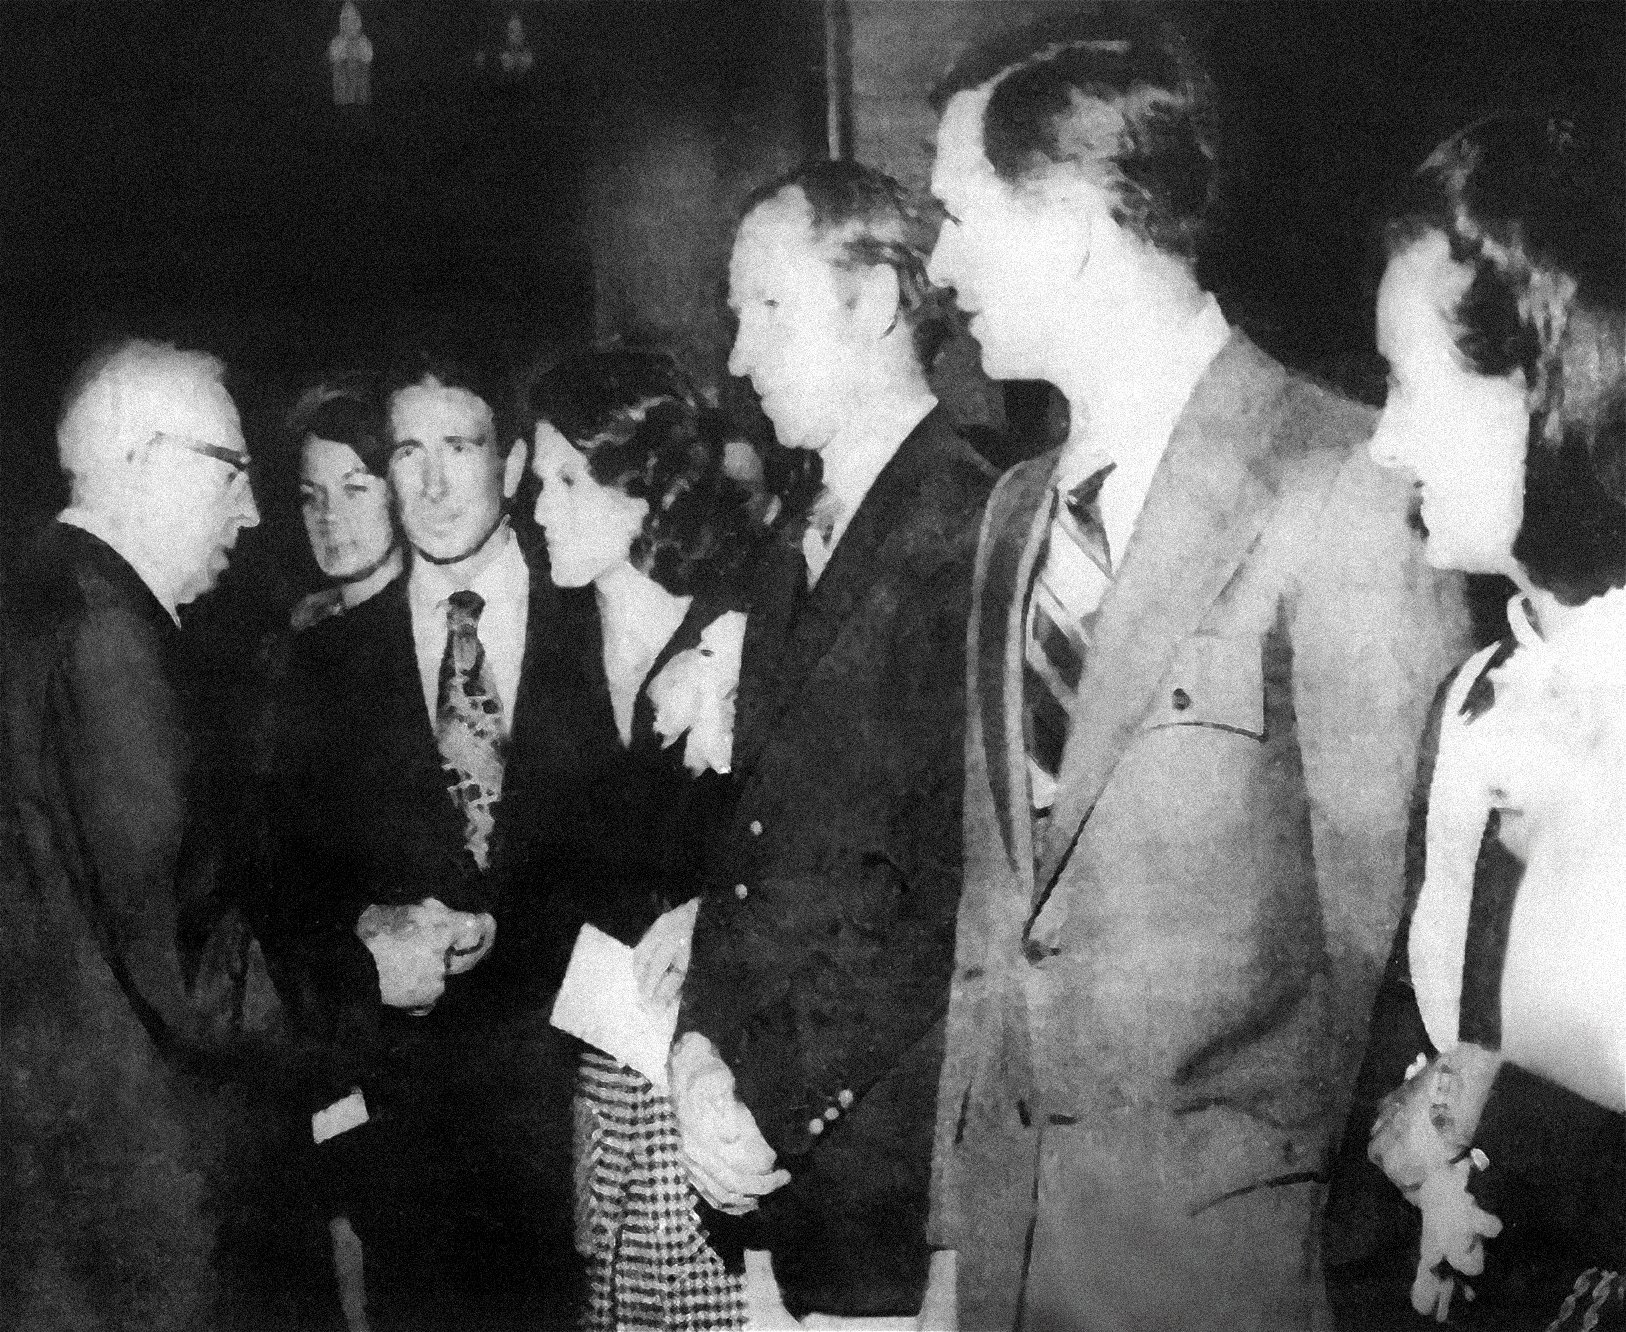 A black and white photograph from The Deseret News newspaper of Latter-day Saint prophet Joseph Field Smith shaking hands and greeting three astronaughts from Apollo 15 and their wives on September 14, 1971.